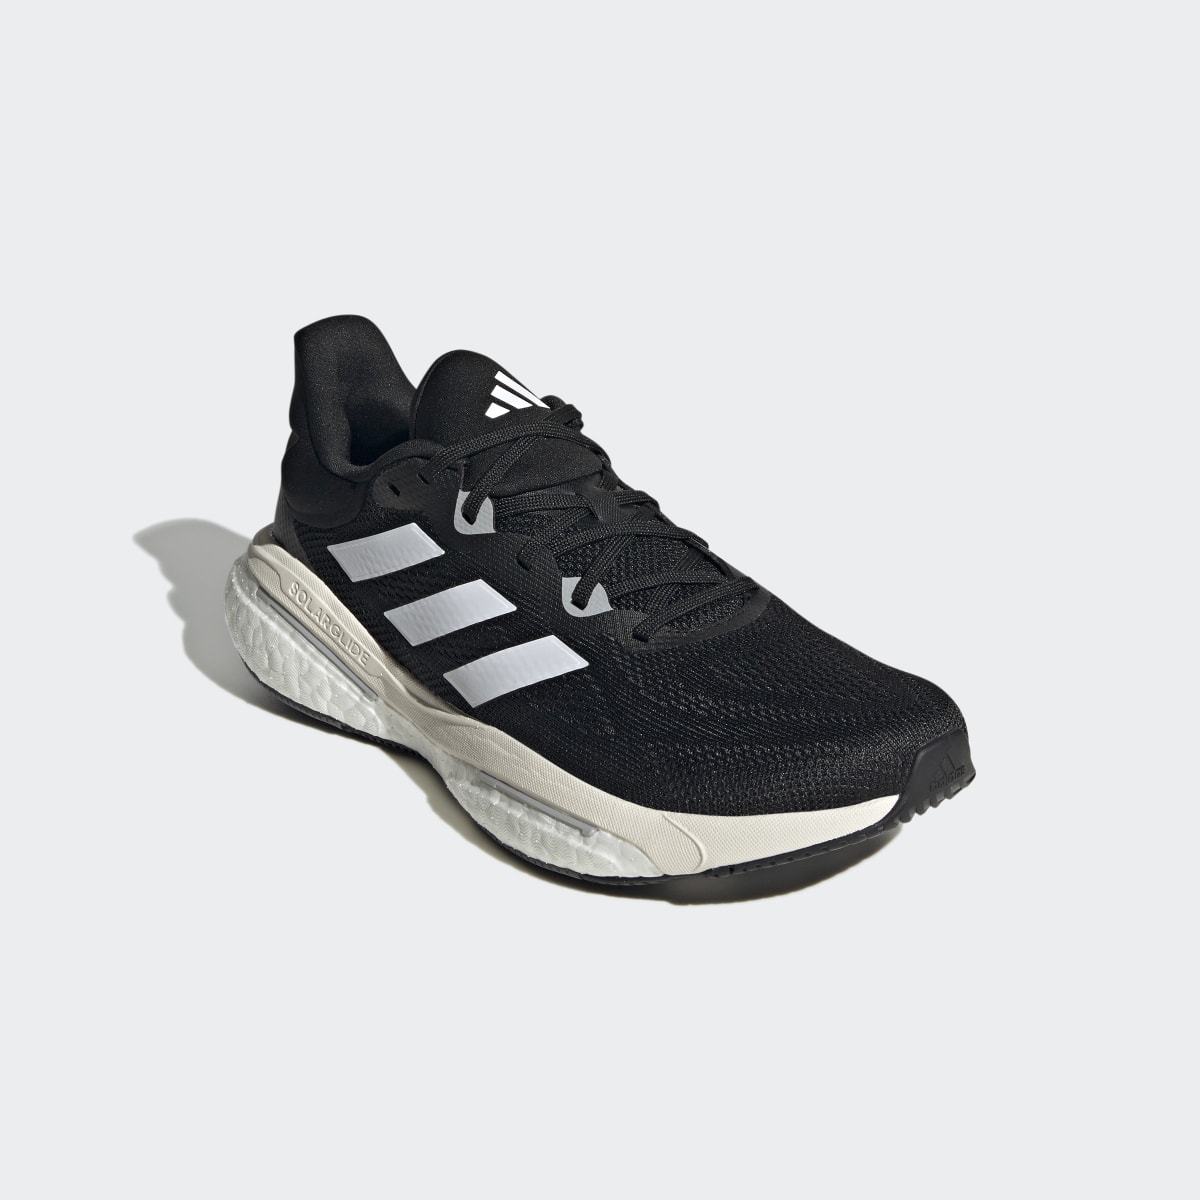 Adidas SOLARGLIDE 6 Shoes. 5